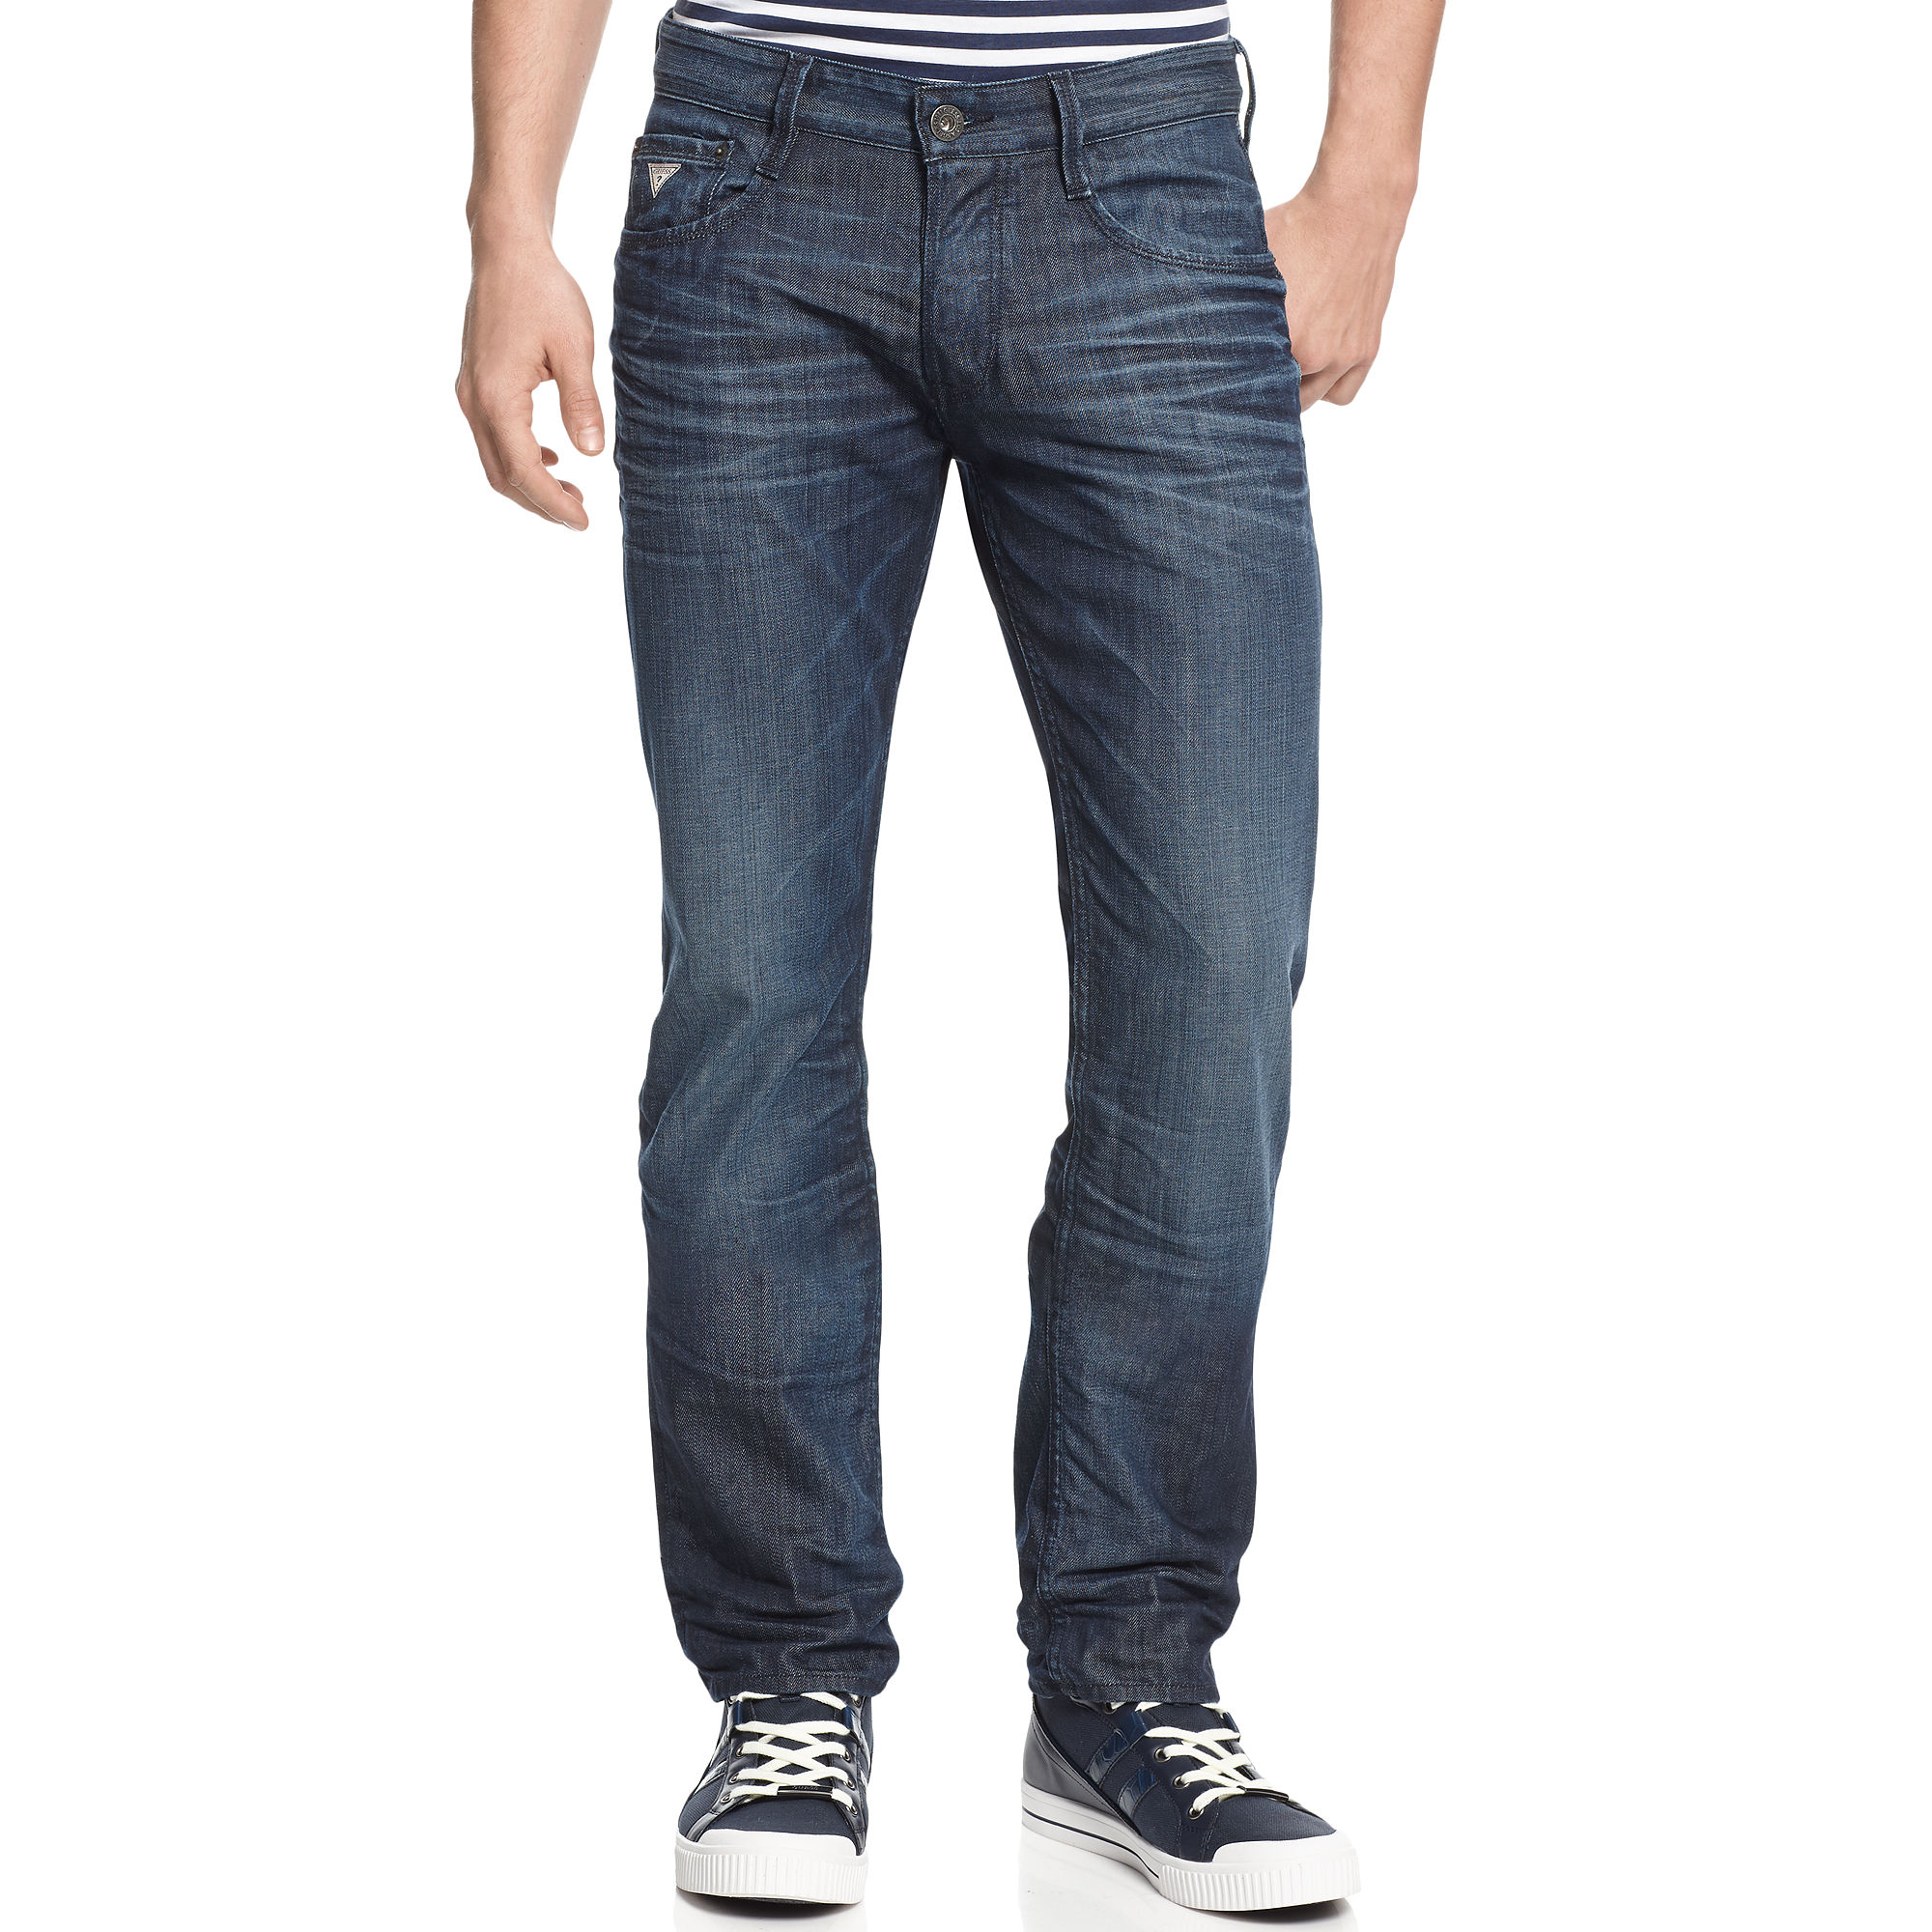 Lyst - Guess Vermont Slim Straight Fit Jeans in Blue for Men